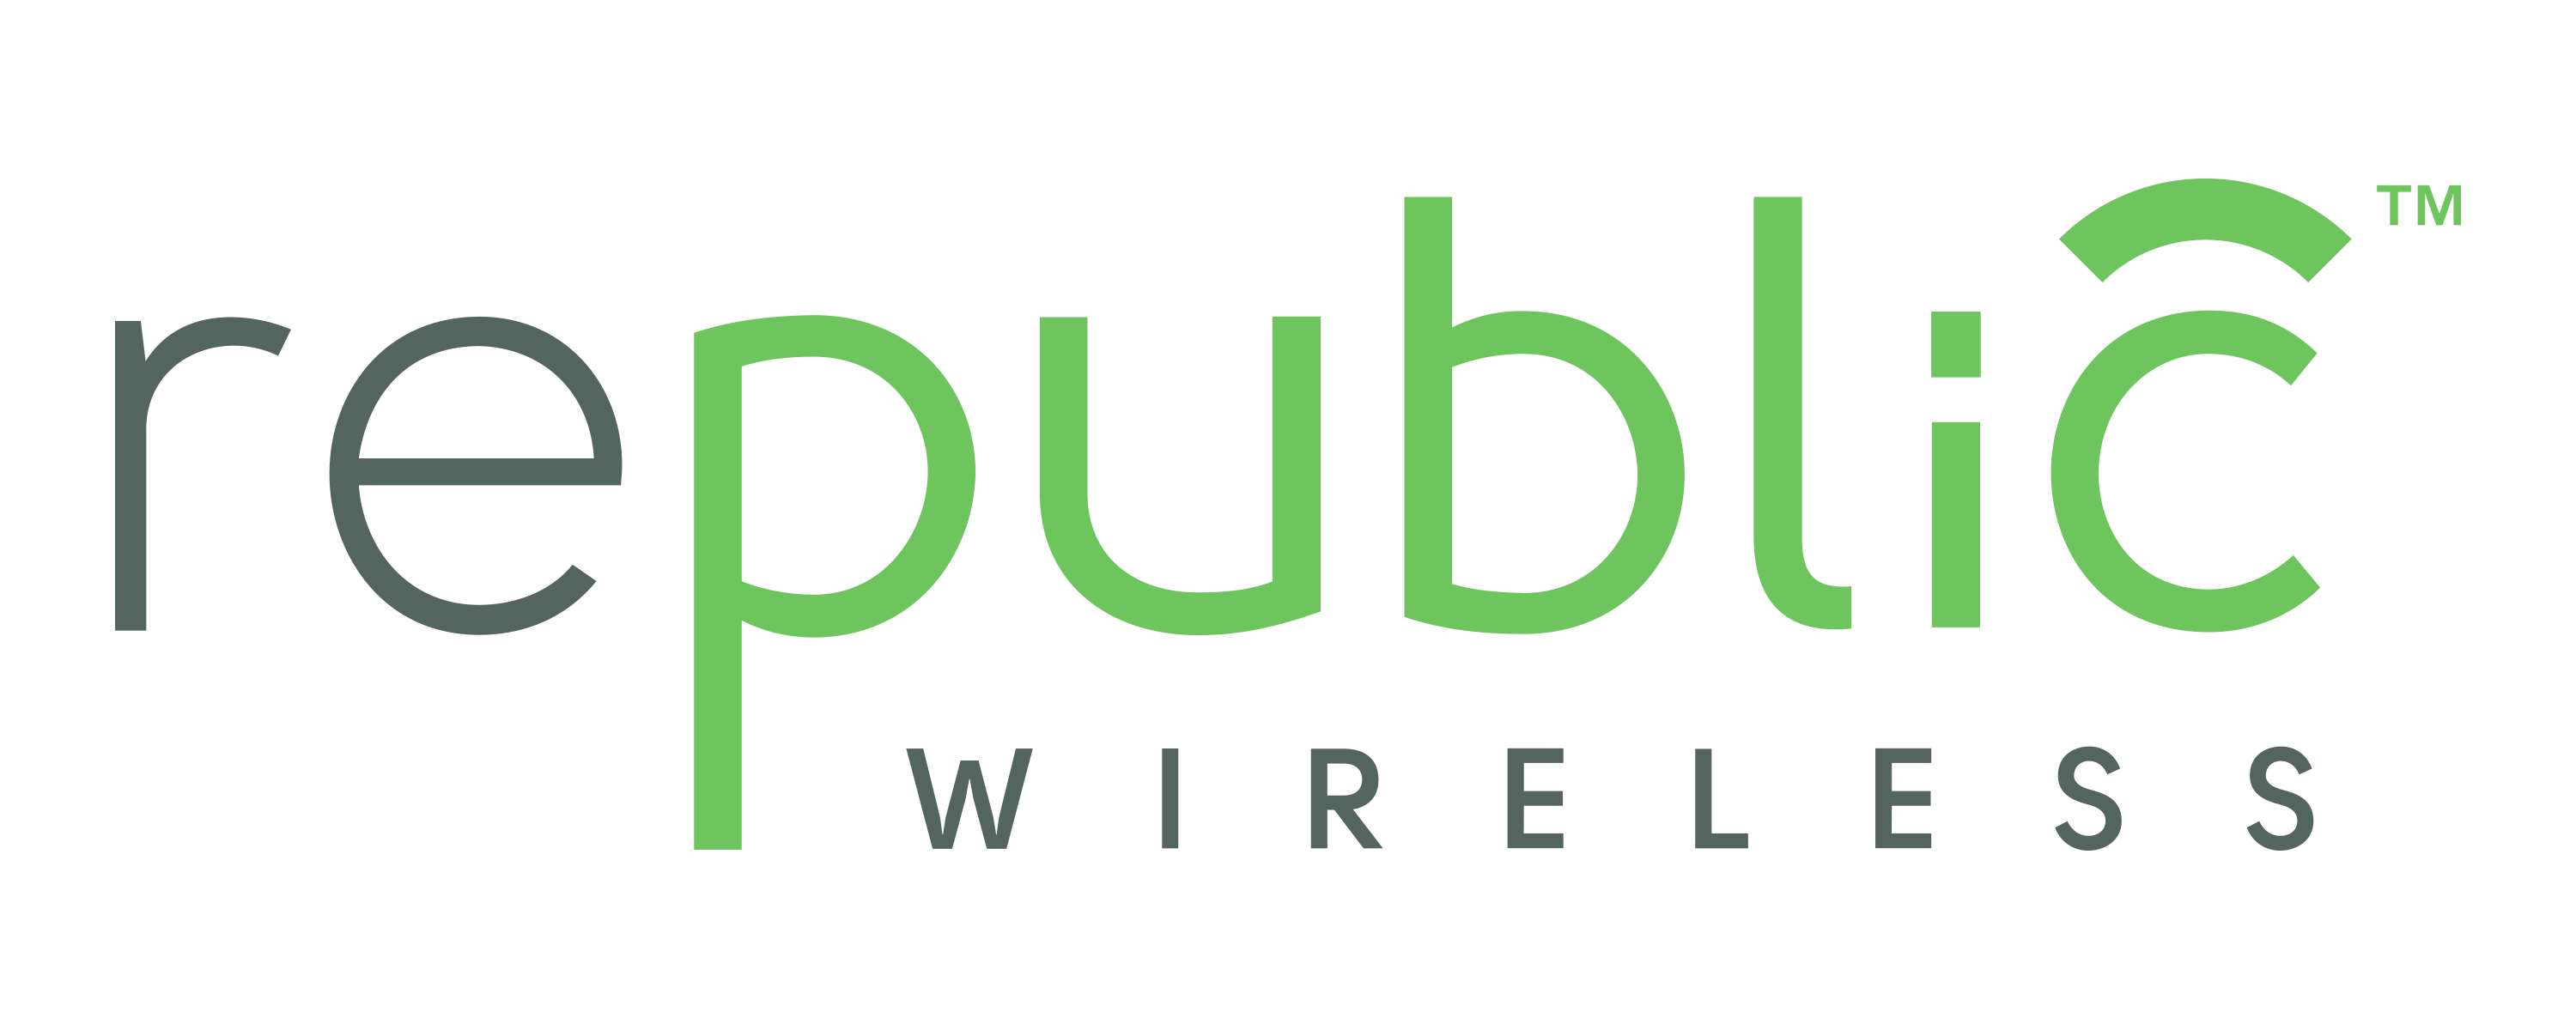 WiFi calling pioneer, Republic Wireless raises the bar yet again with an offer to repay customers for all unused cellular data.